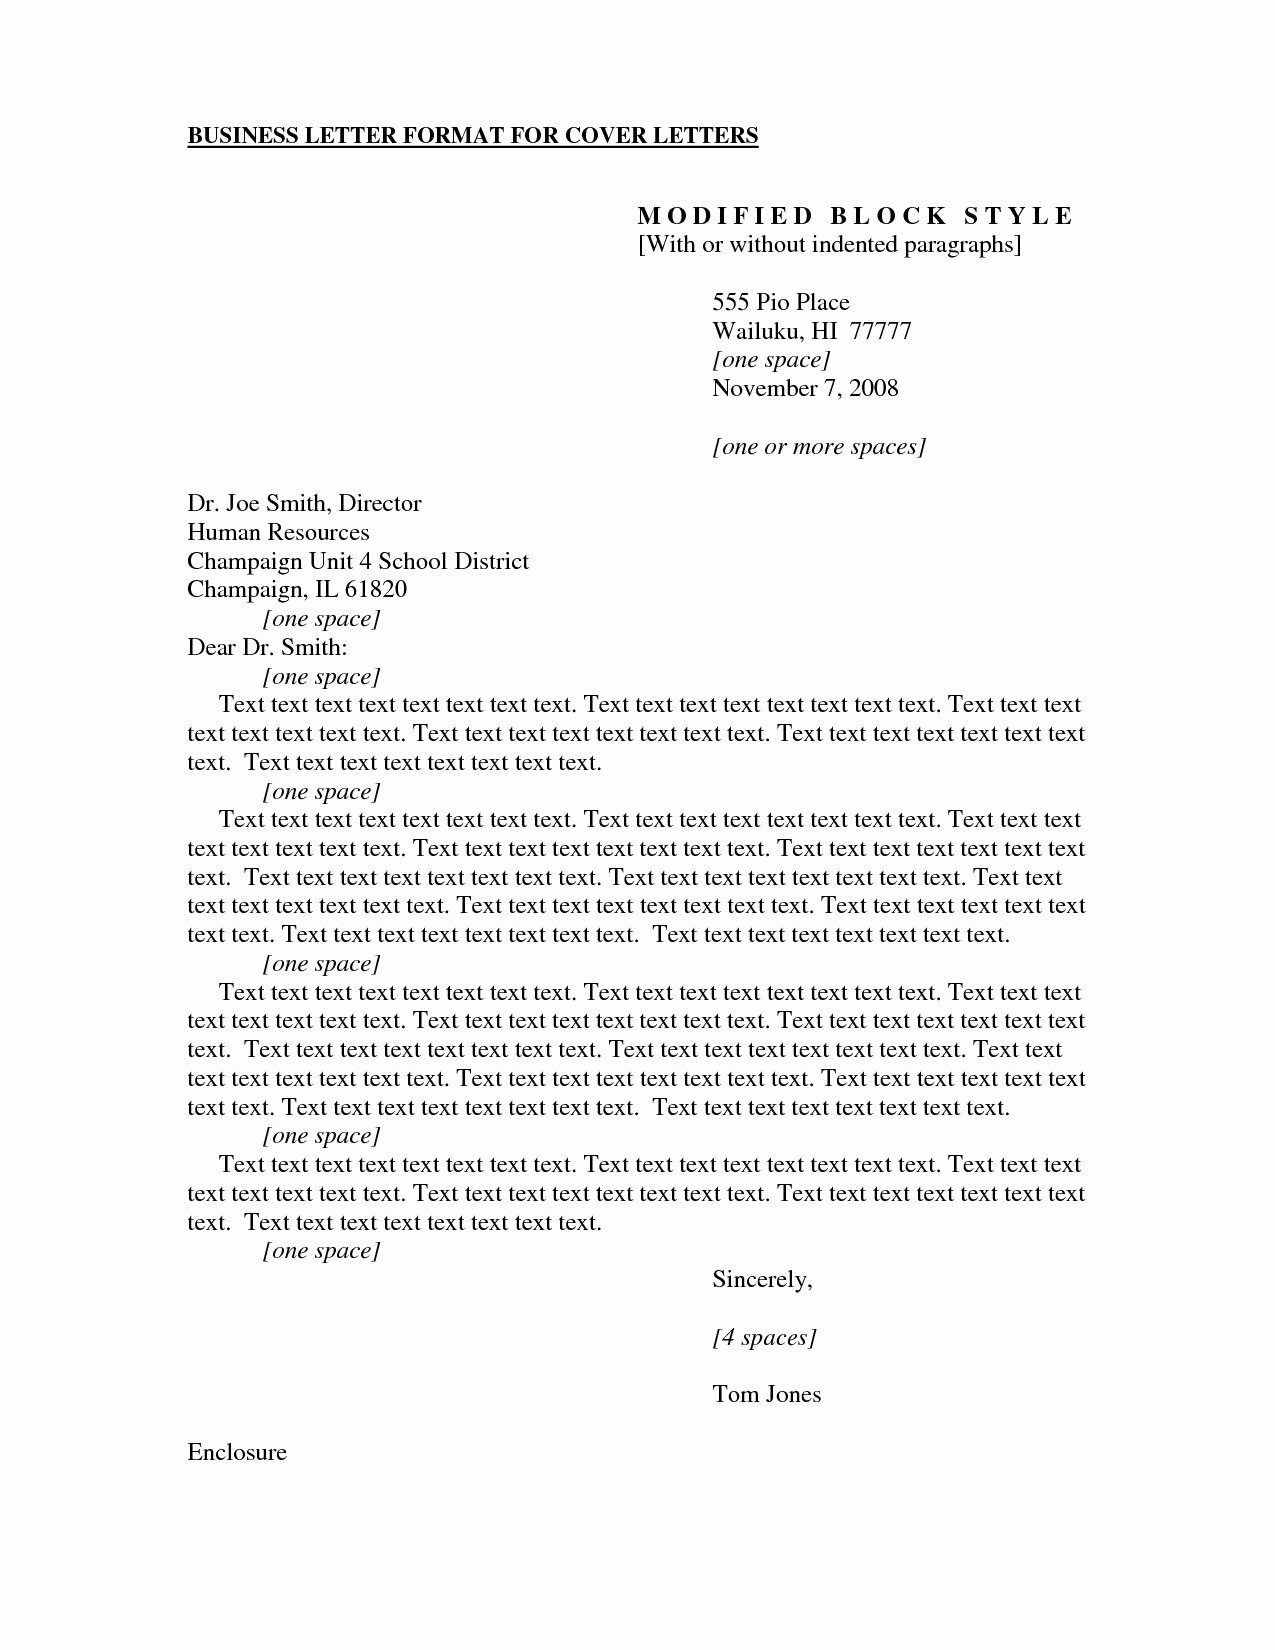 Sample Business Cover Letters Luxury formal Business Cover Letter format